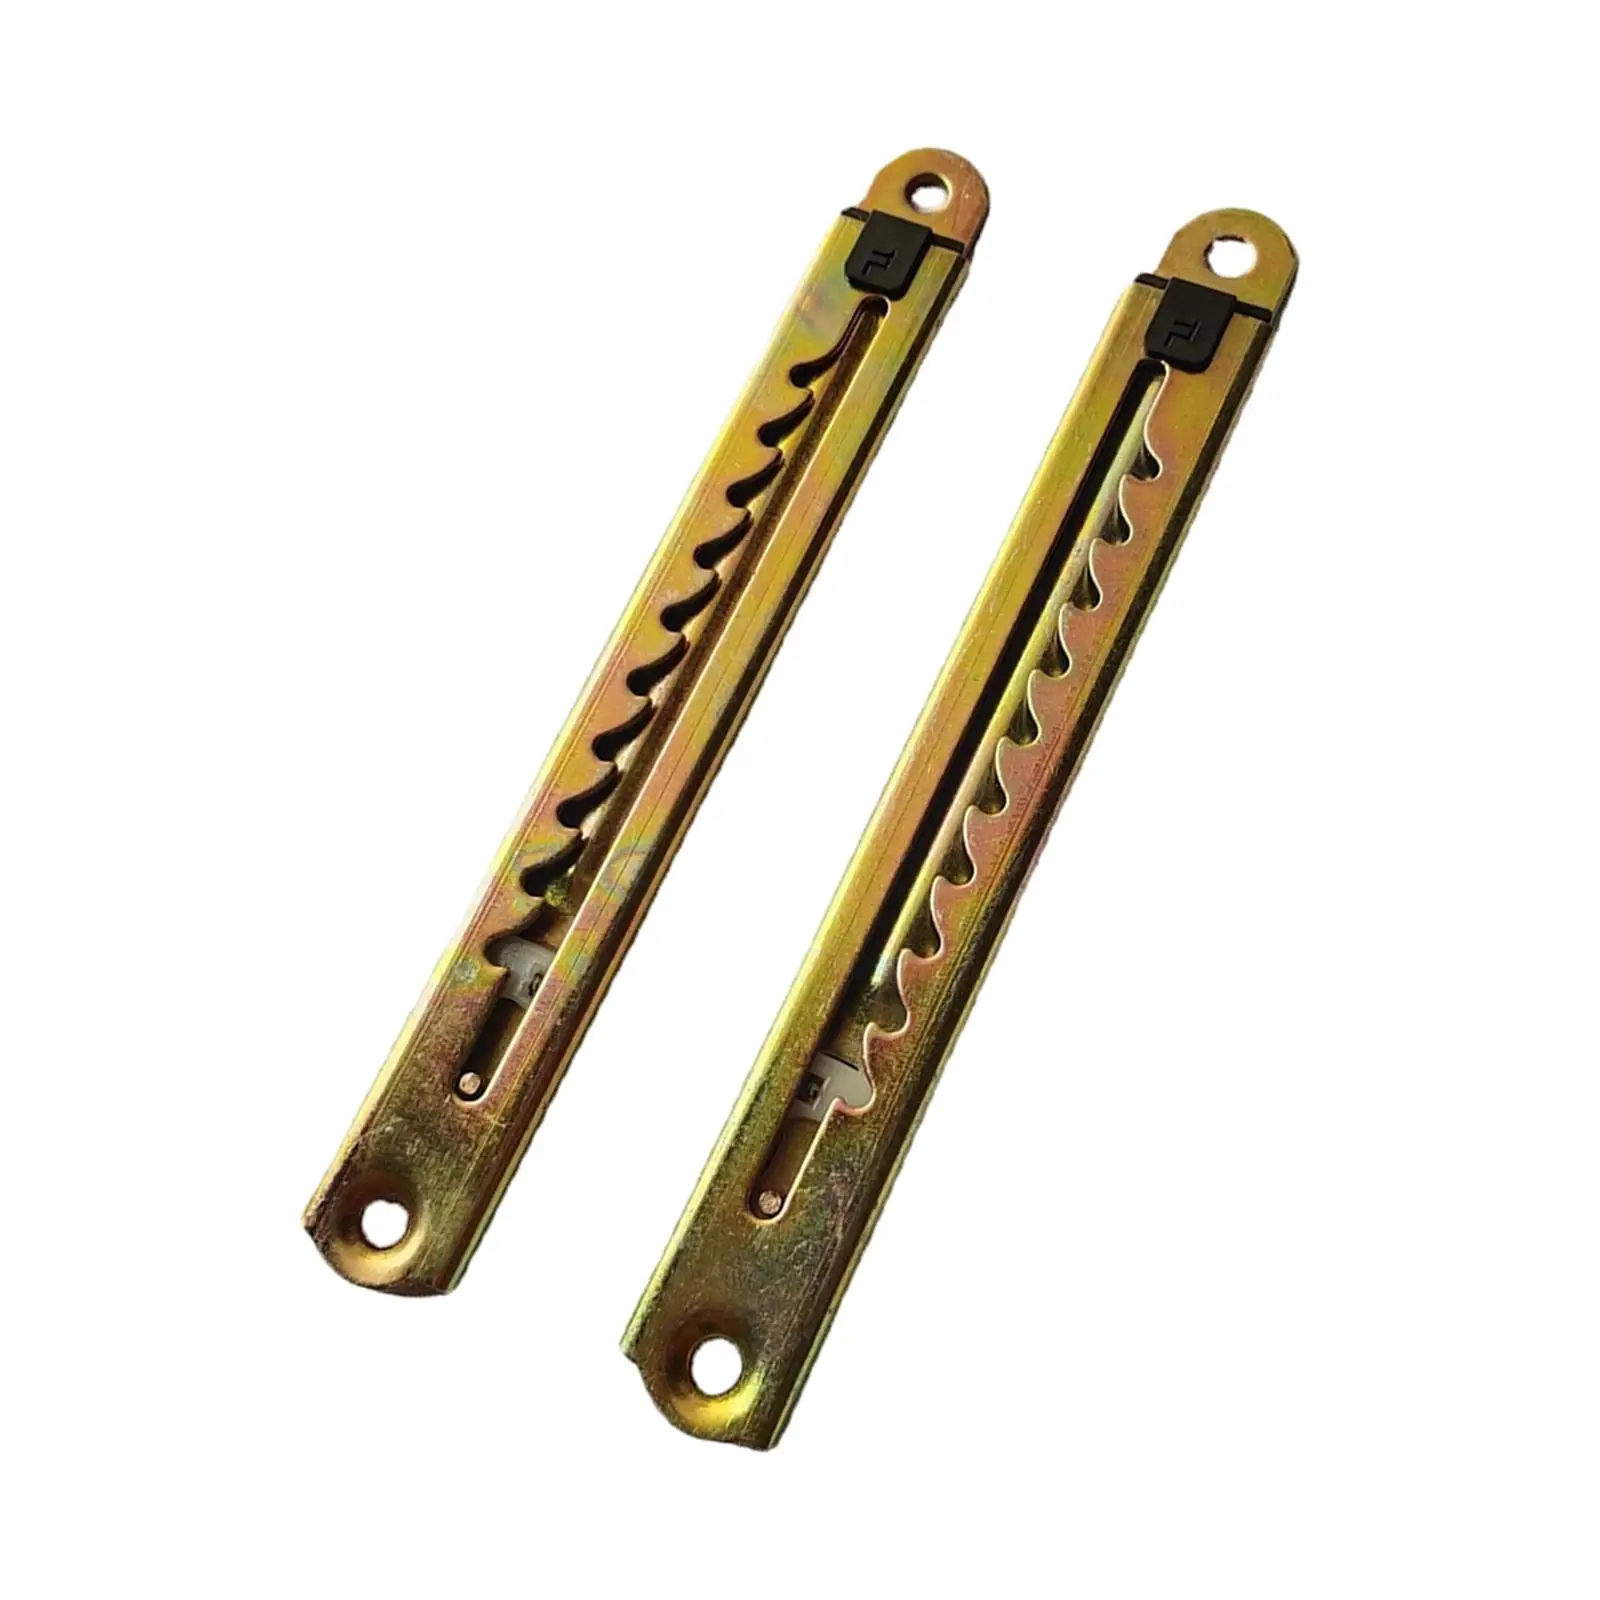 2Pcs Adjustable Lift Hinges Lift Up Support for Bed Furniture Accessory